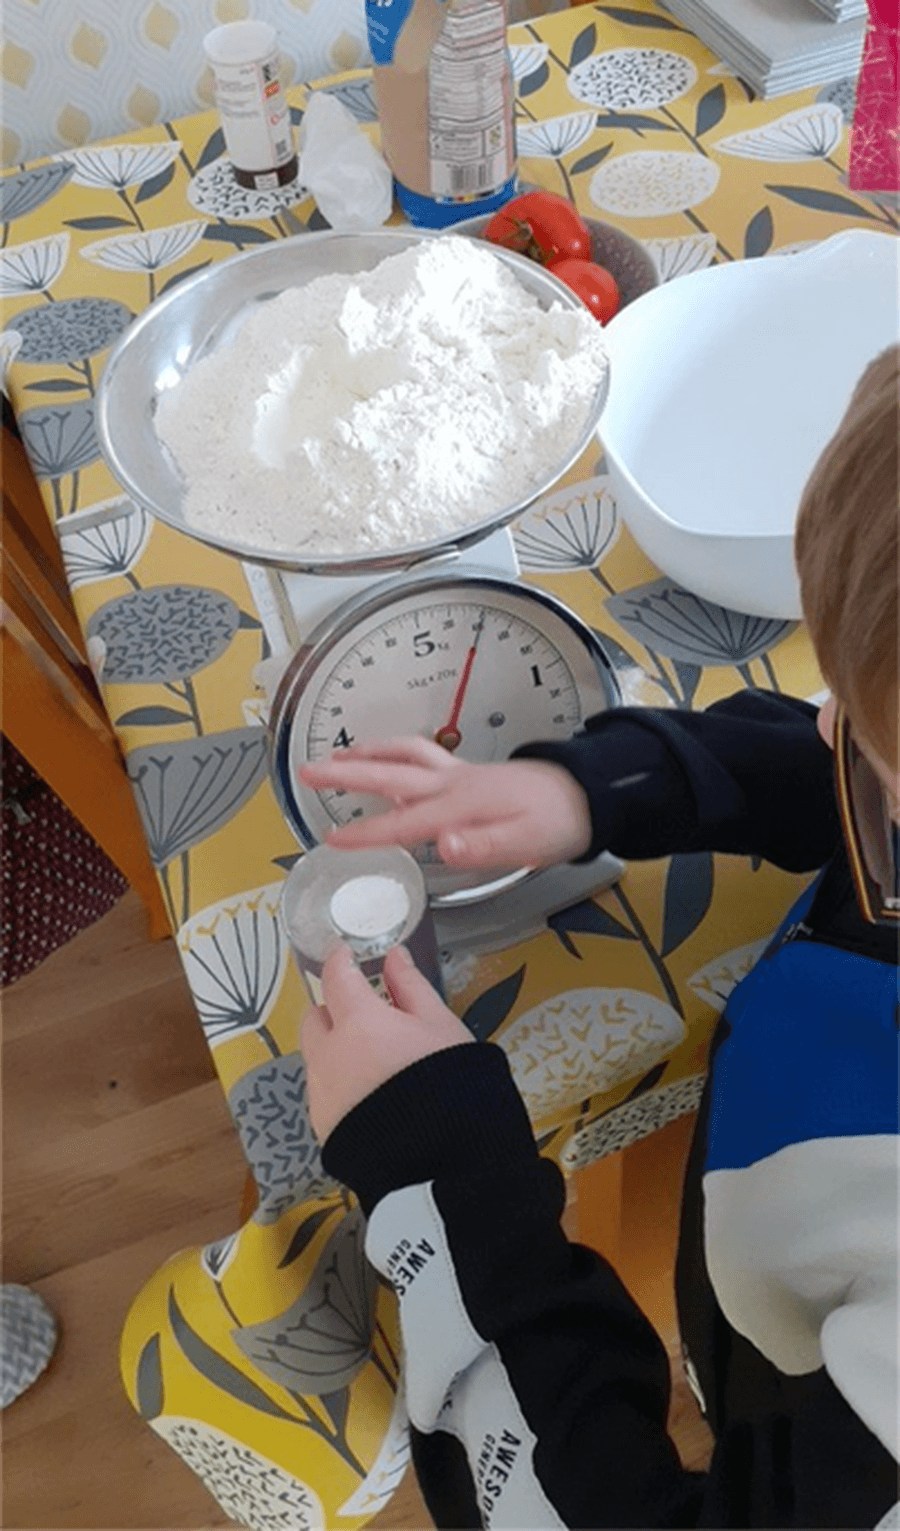 Weighing and Measuring